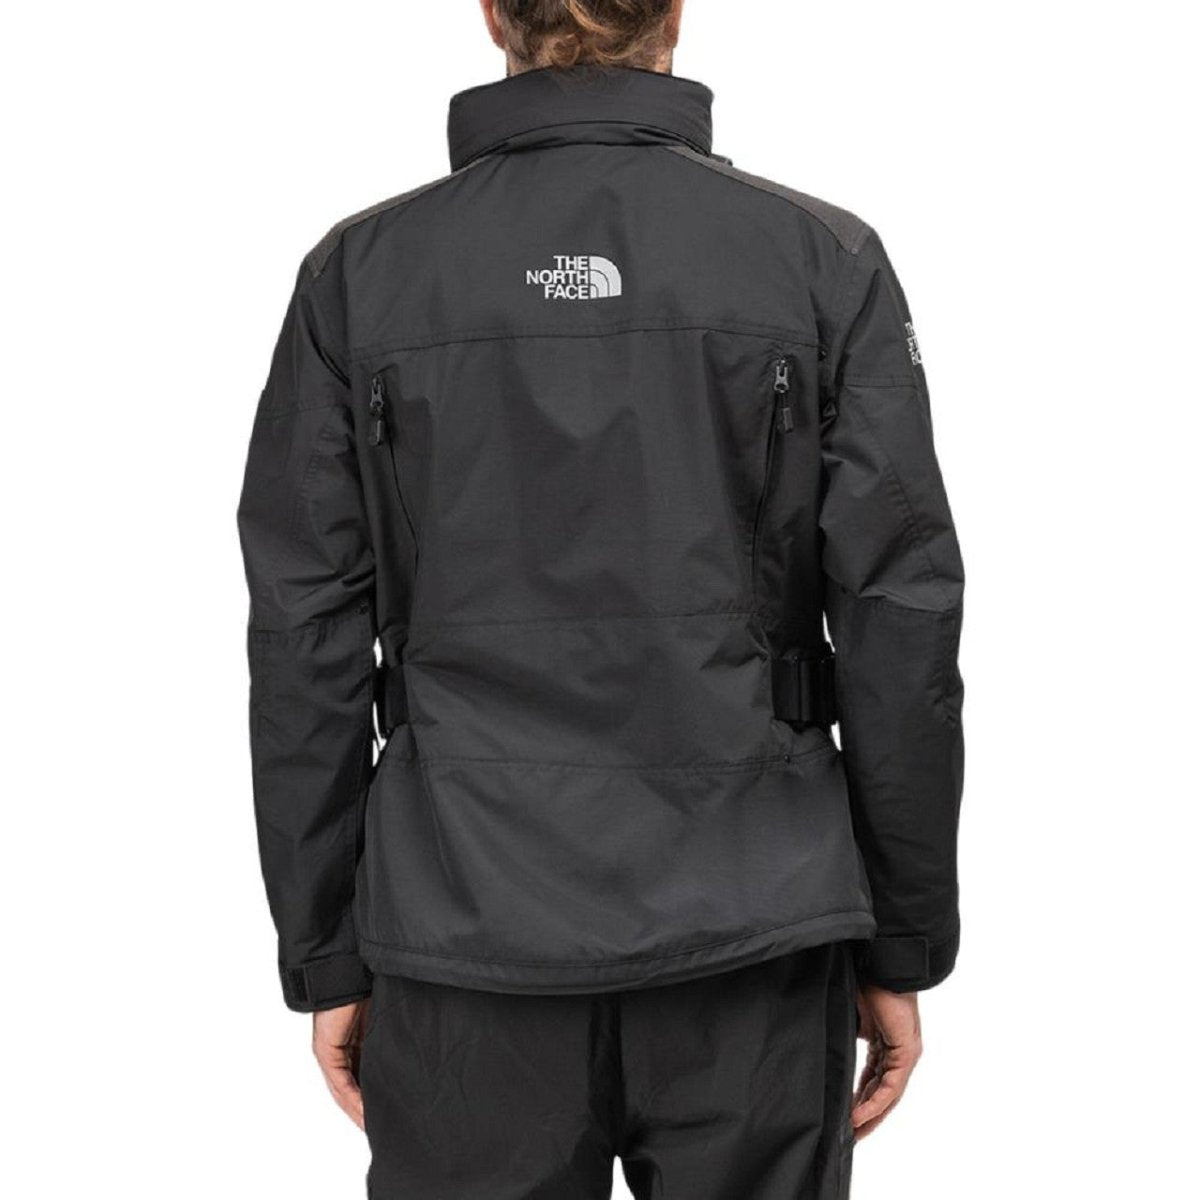 The North Face Steep Tech Apogee jacket in black